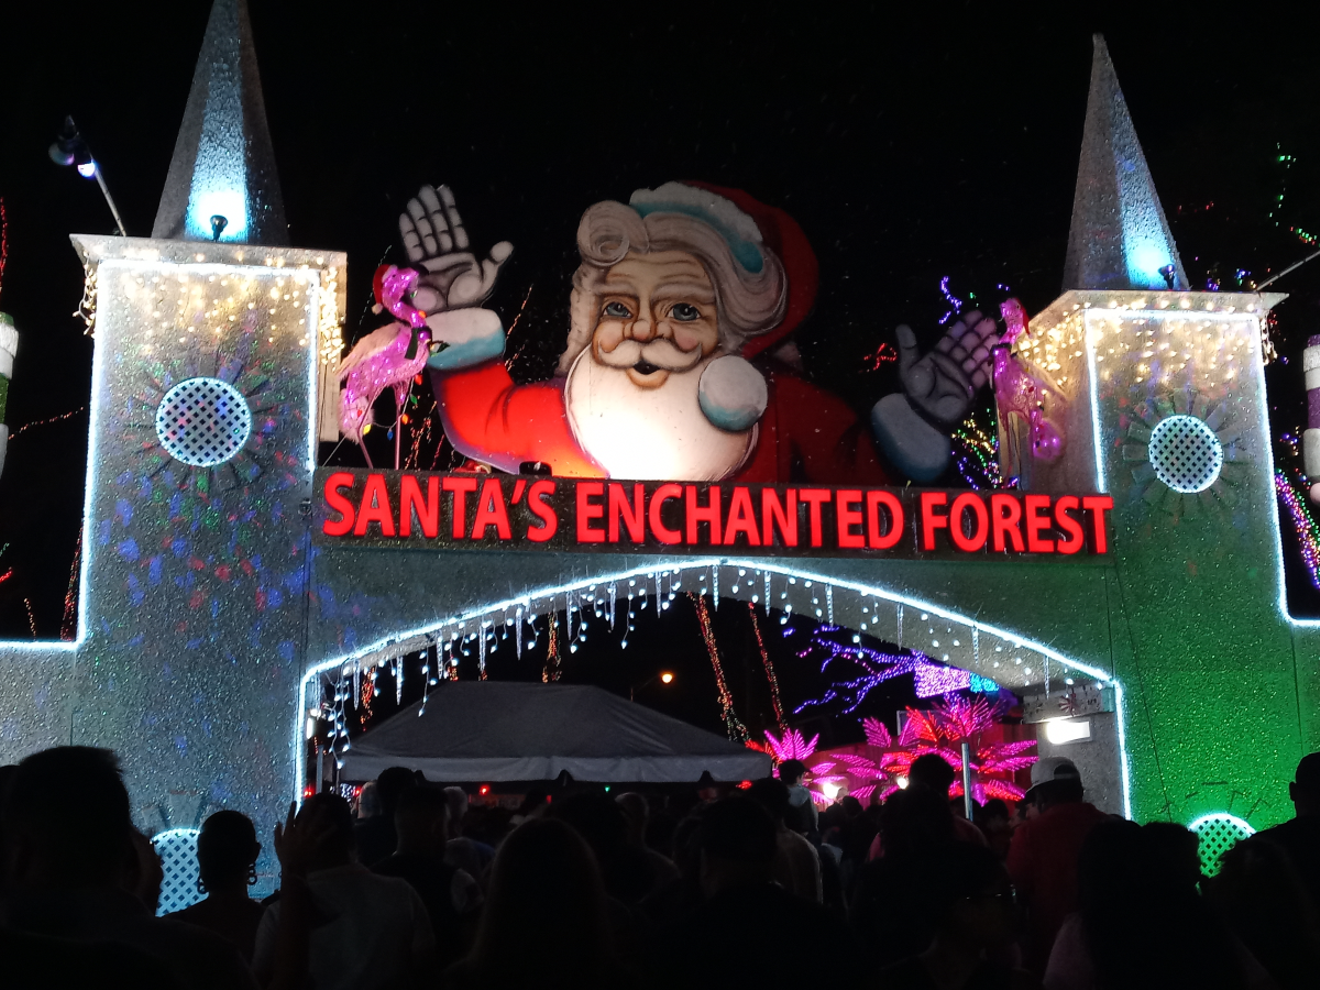 Santa's Enchanted Forest, formerly located at Tropical Park, now has a new home in Hialeah Park on E. Fourth Avenue. Not everyone is saying, "Ho, ho, ho," though.